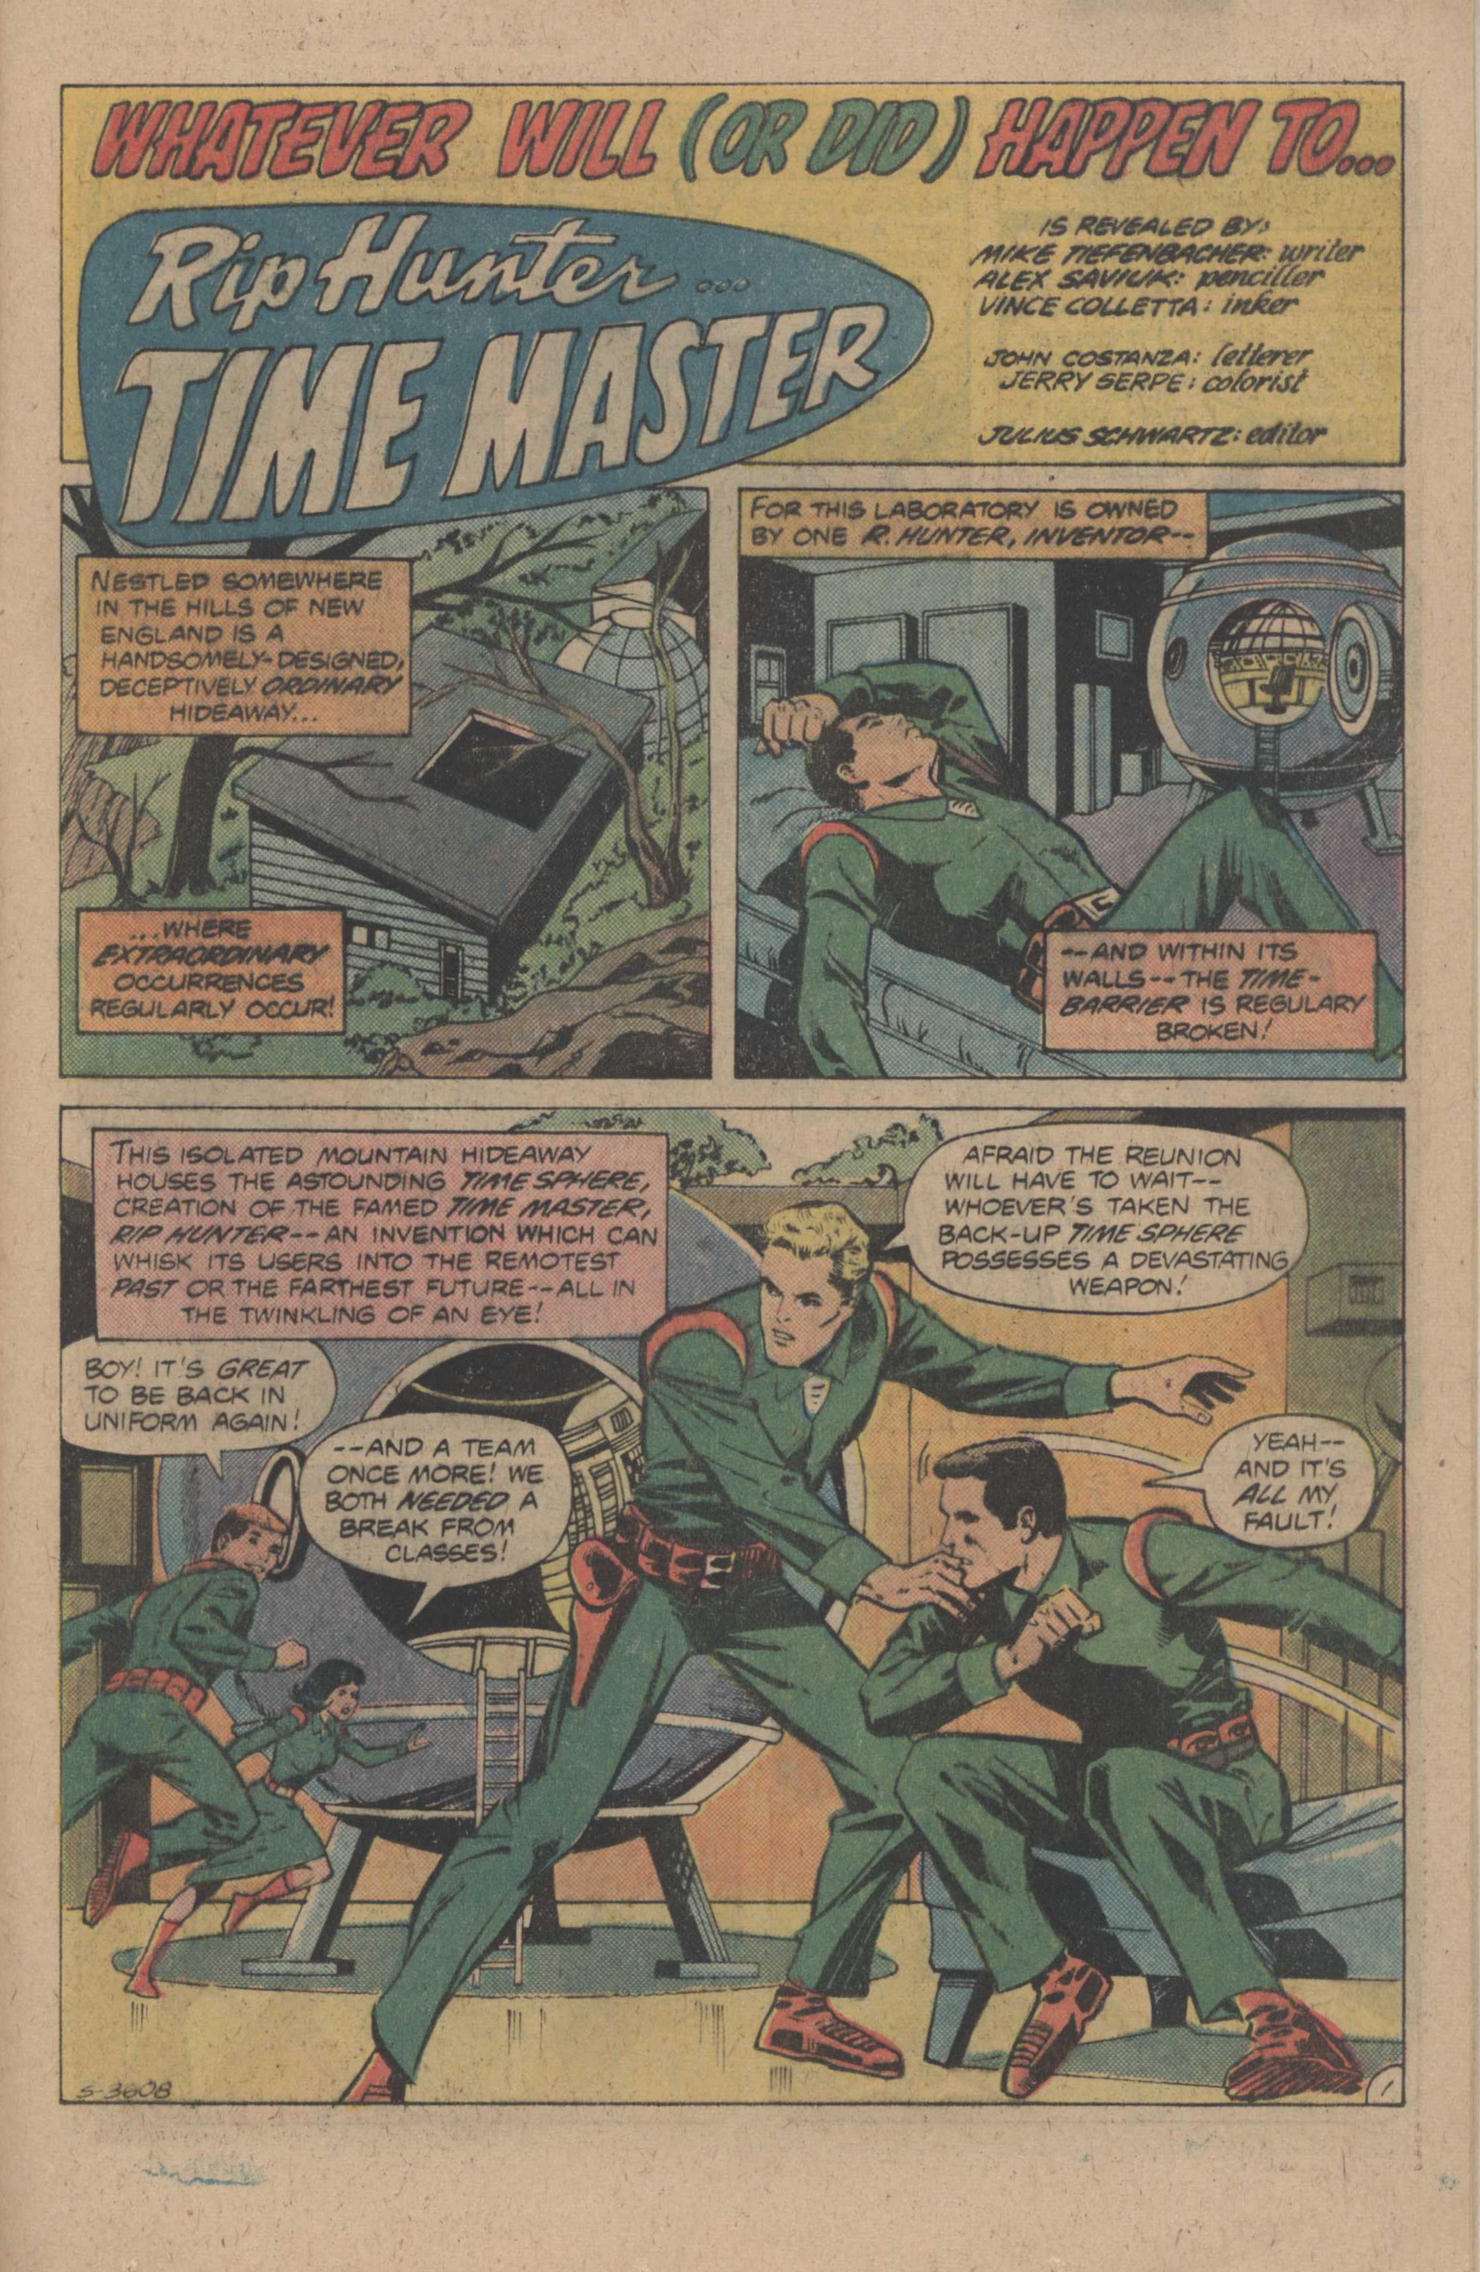 Whatever Will (or Did) Happen To... Rip Hunter, Time Master! From DC Comics Presents #37, by Mike Tiefenbacher, Alex Saviuk, and Vince Colletta.